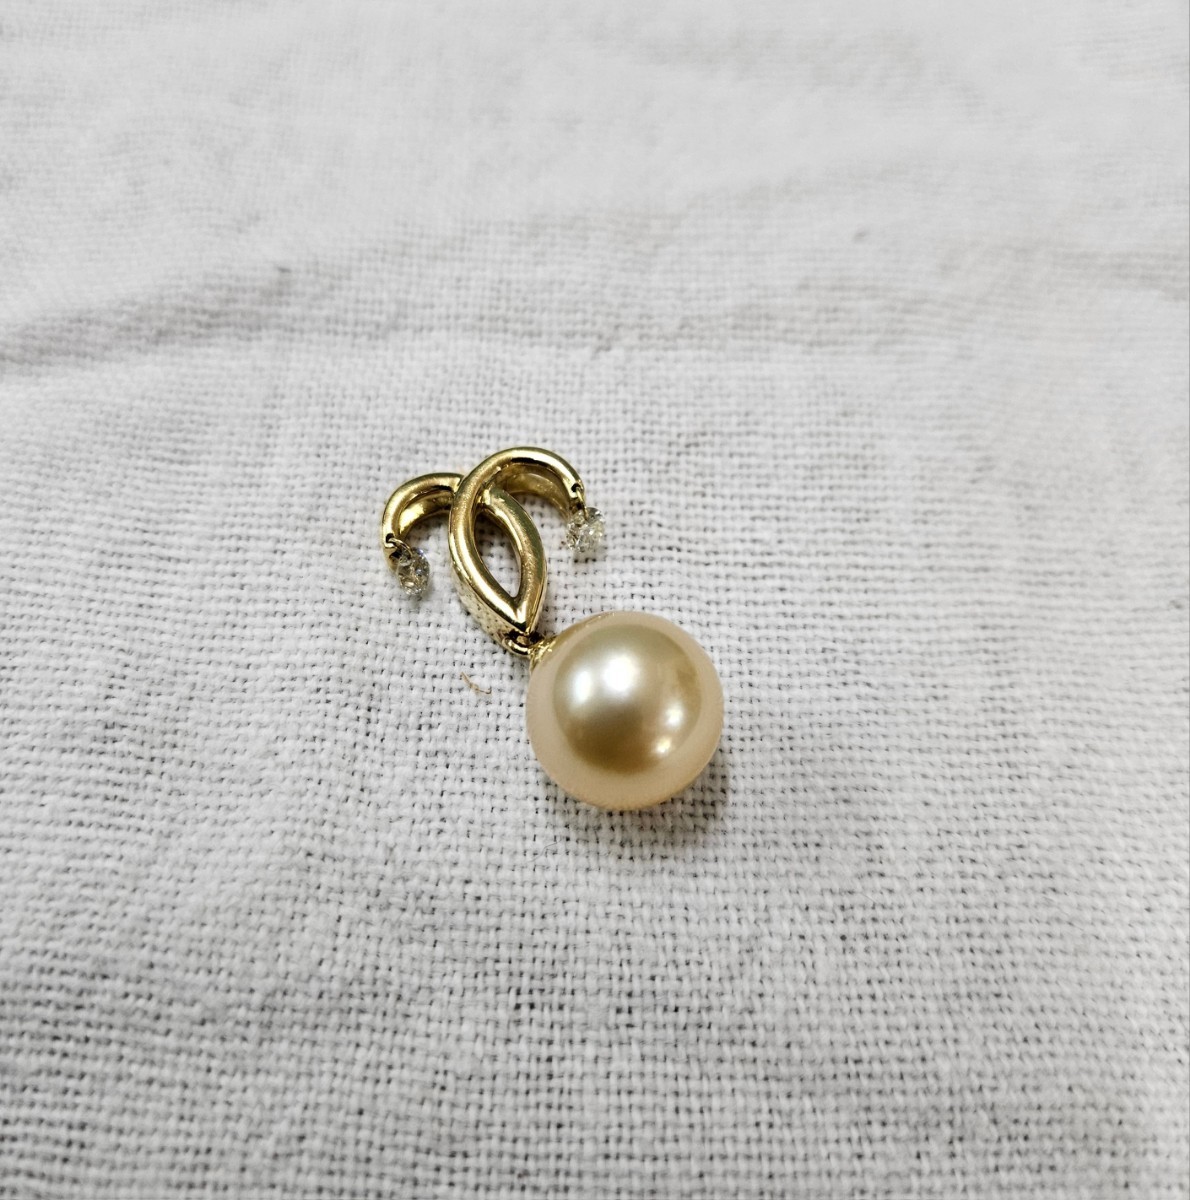 K18 pearl × diamond necklace top book@ pearl jewelry accessory 18 gold approximately 3.72g D0.17ct one bead pendant 